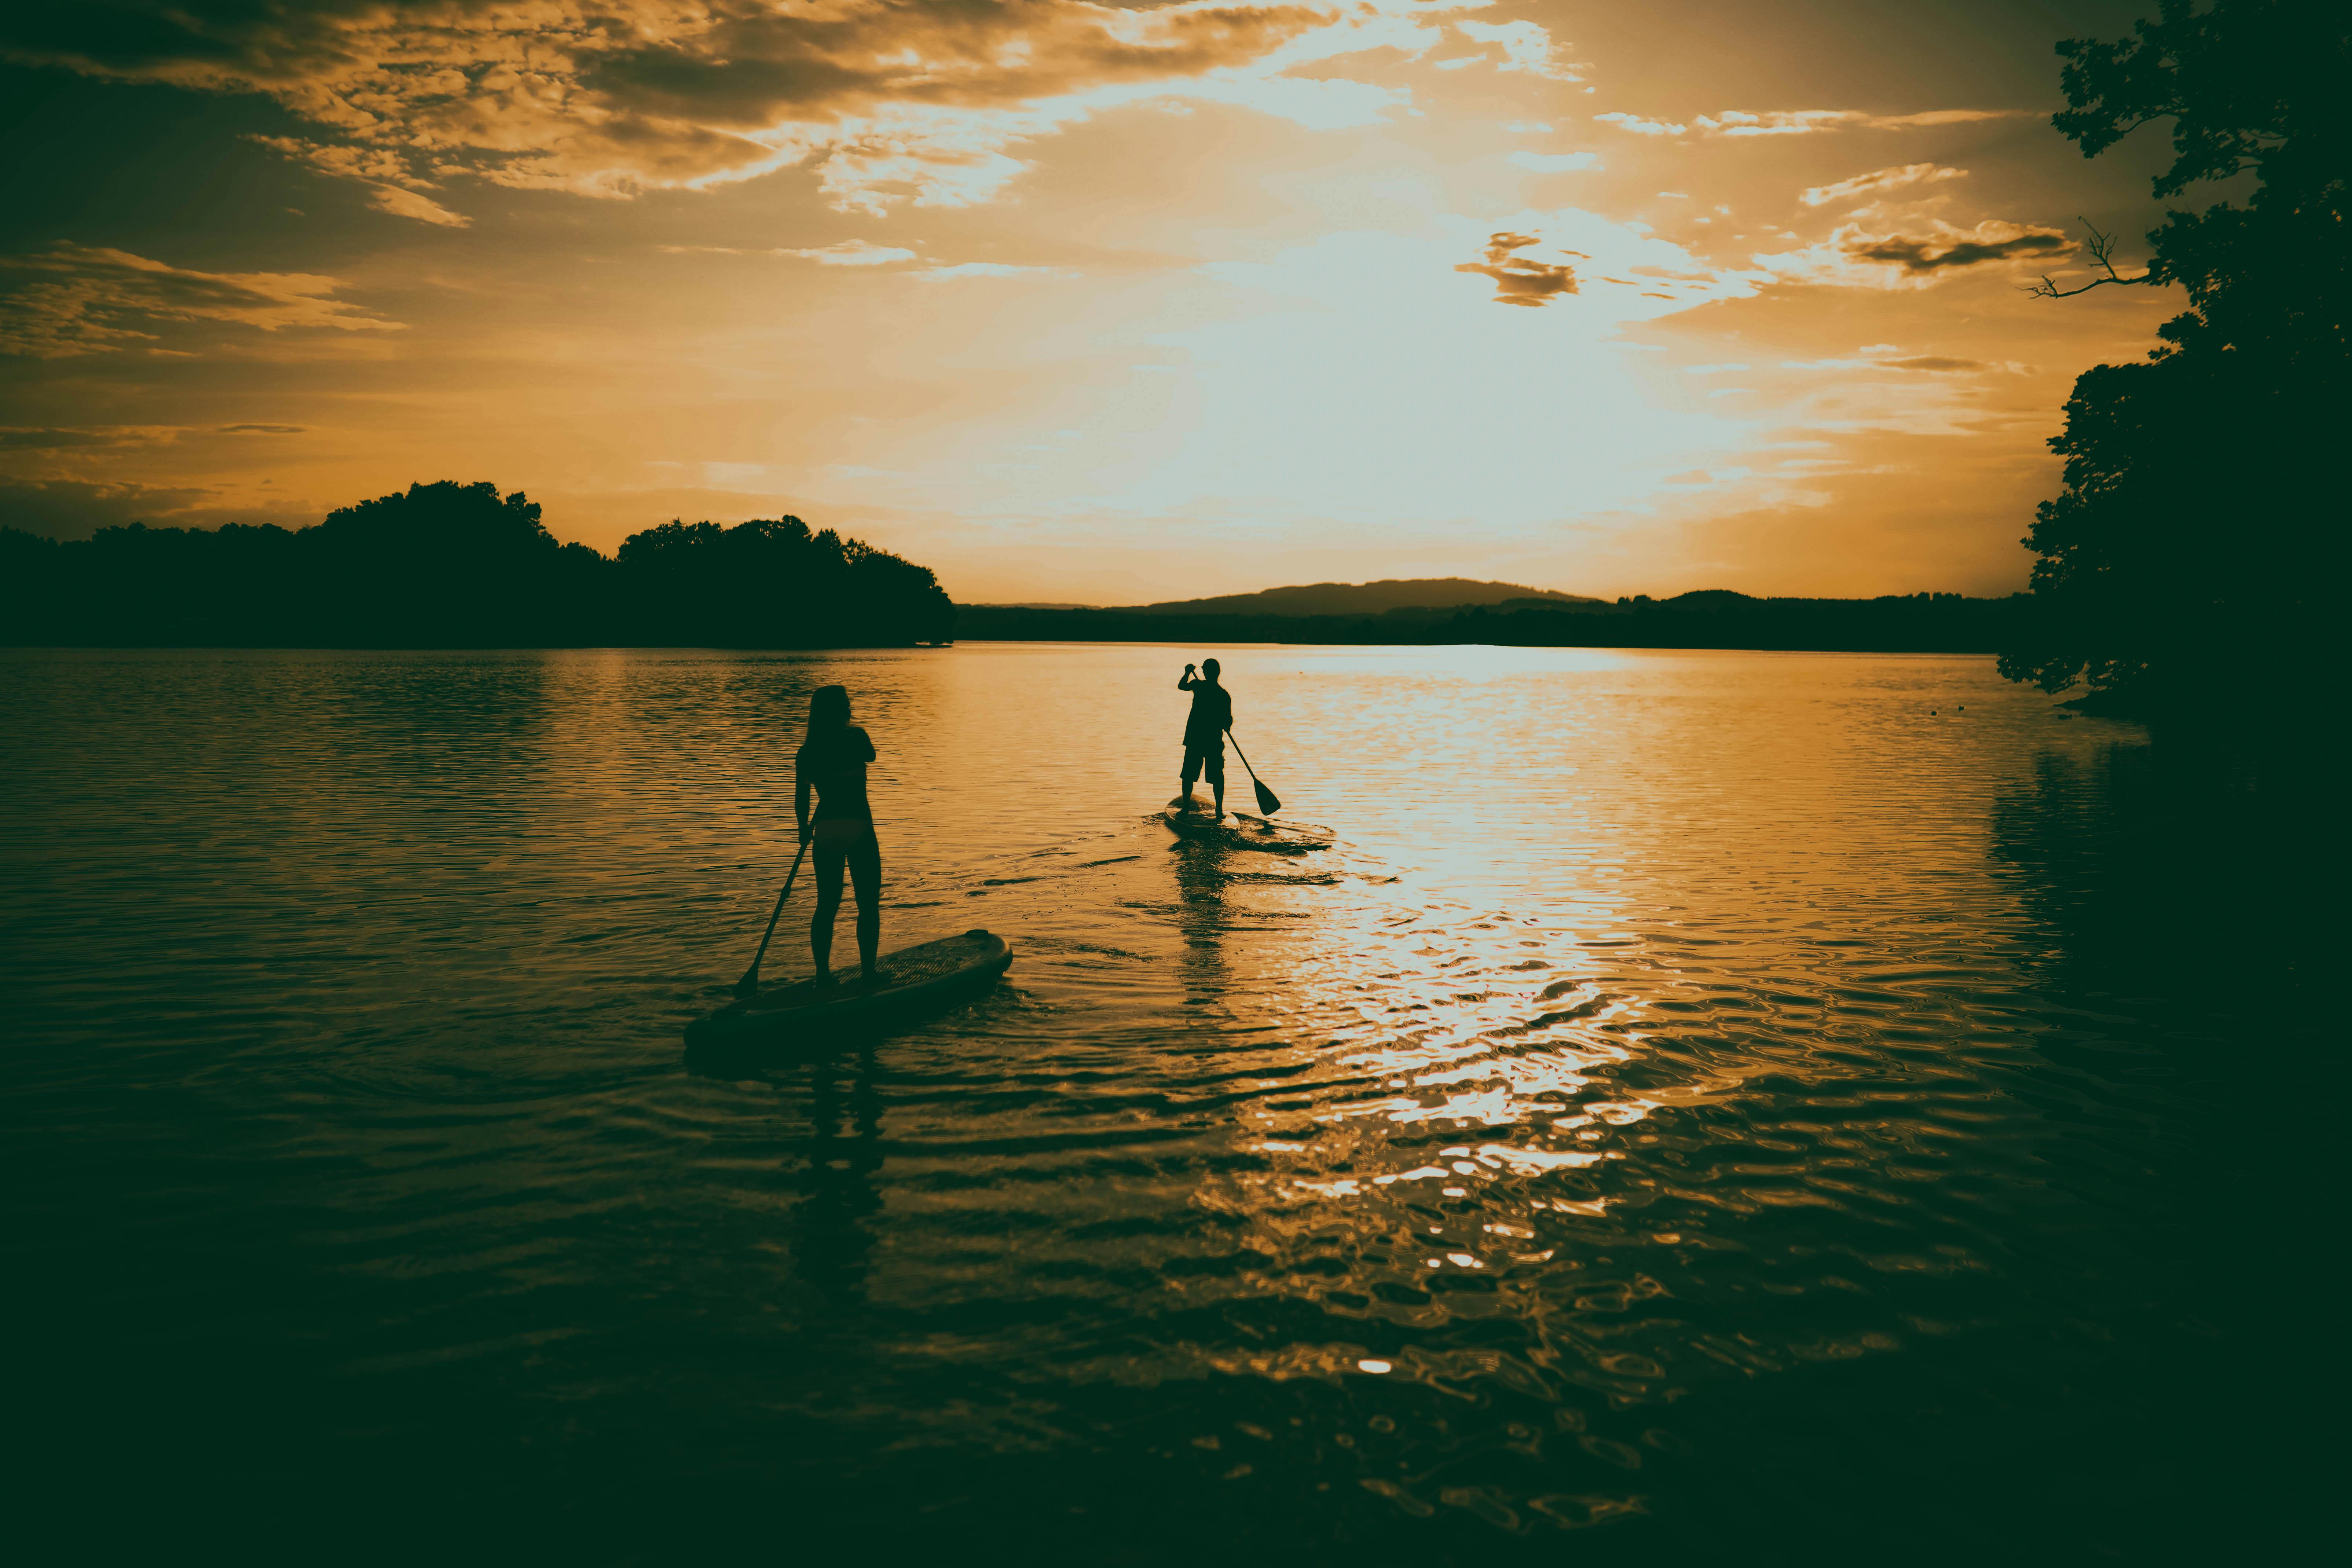 Gliding Through Nature: Experience the Thrills of Stand Up Paddle Boarding on Your Next Canoe and Tourism Adventure